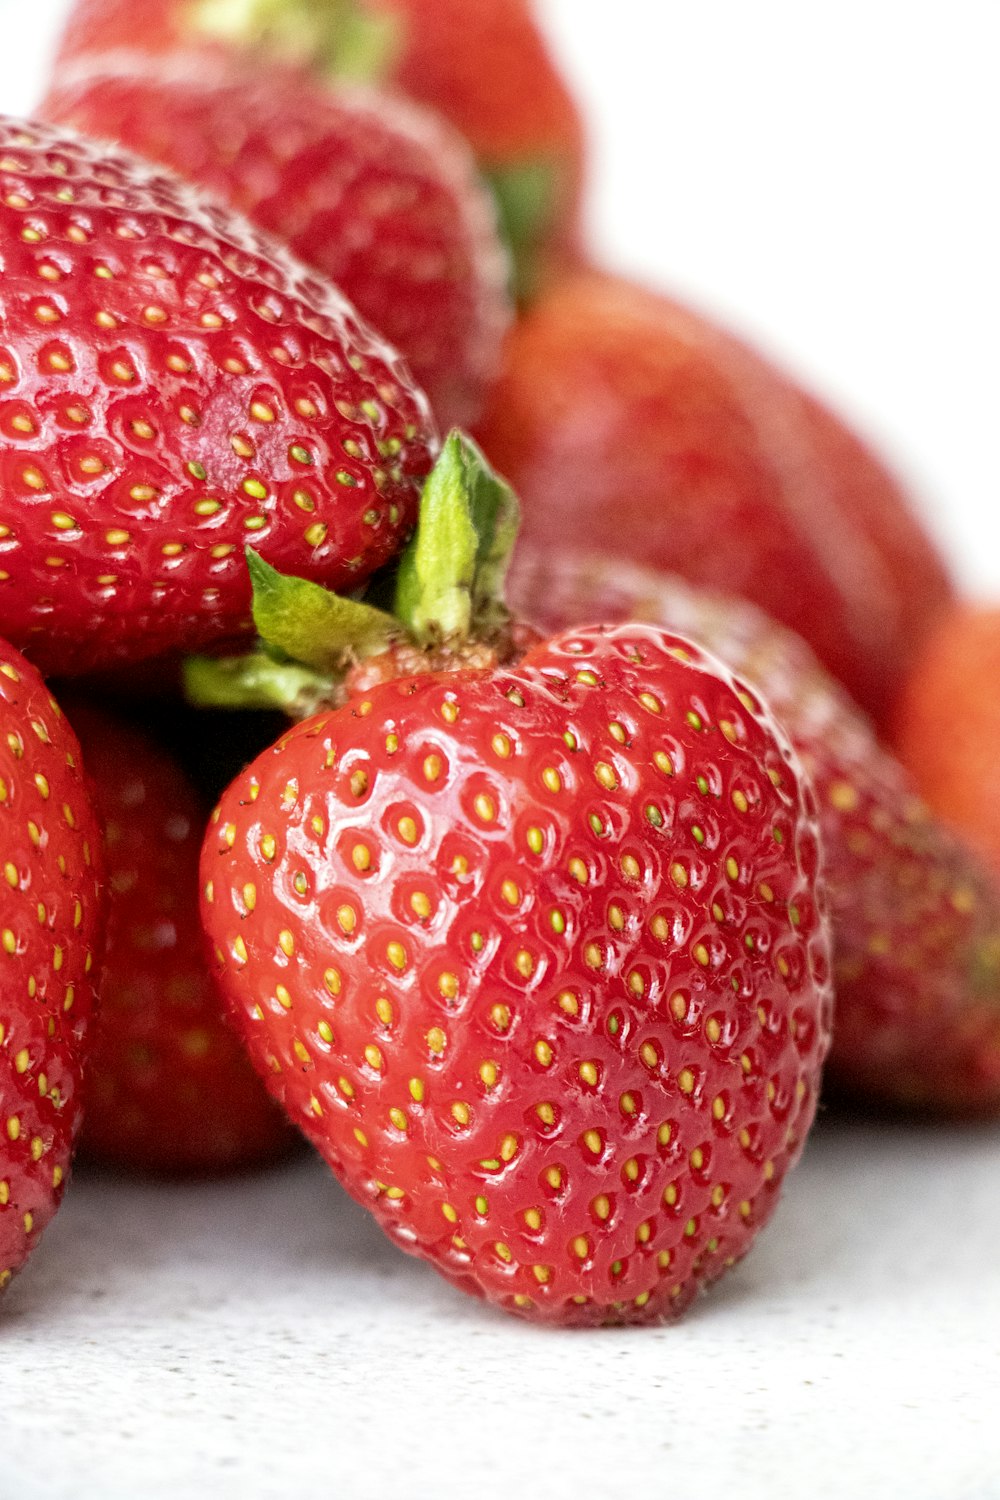 red strawberries in close up photography